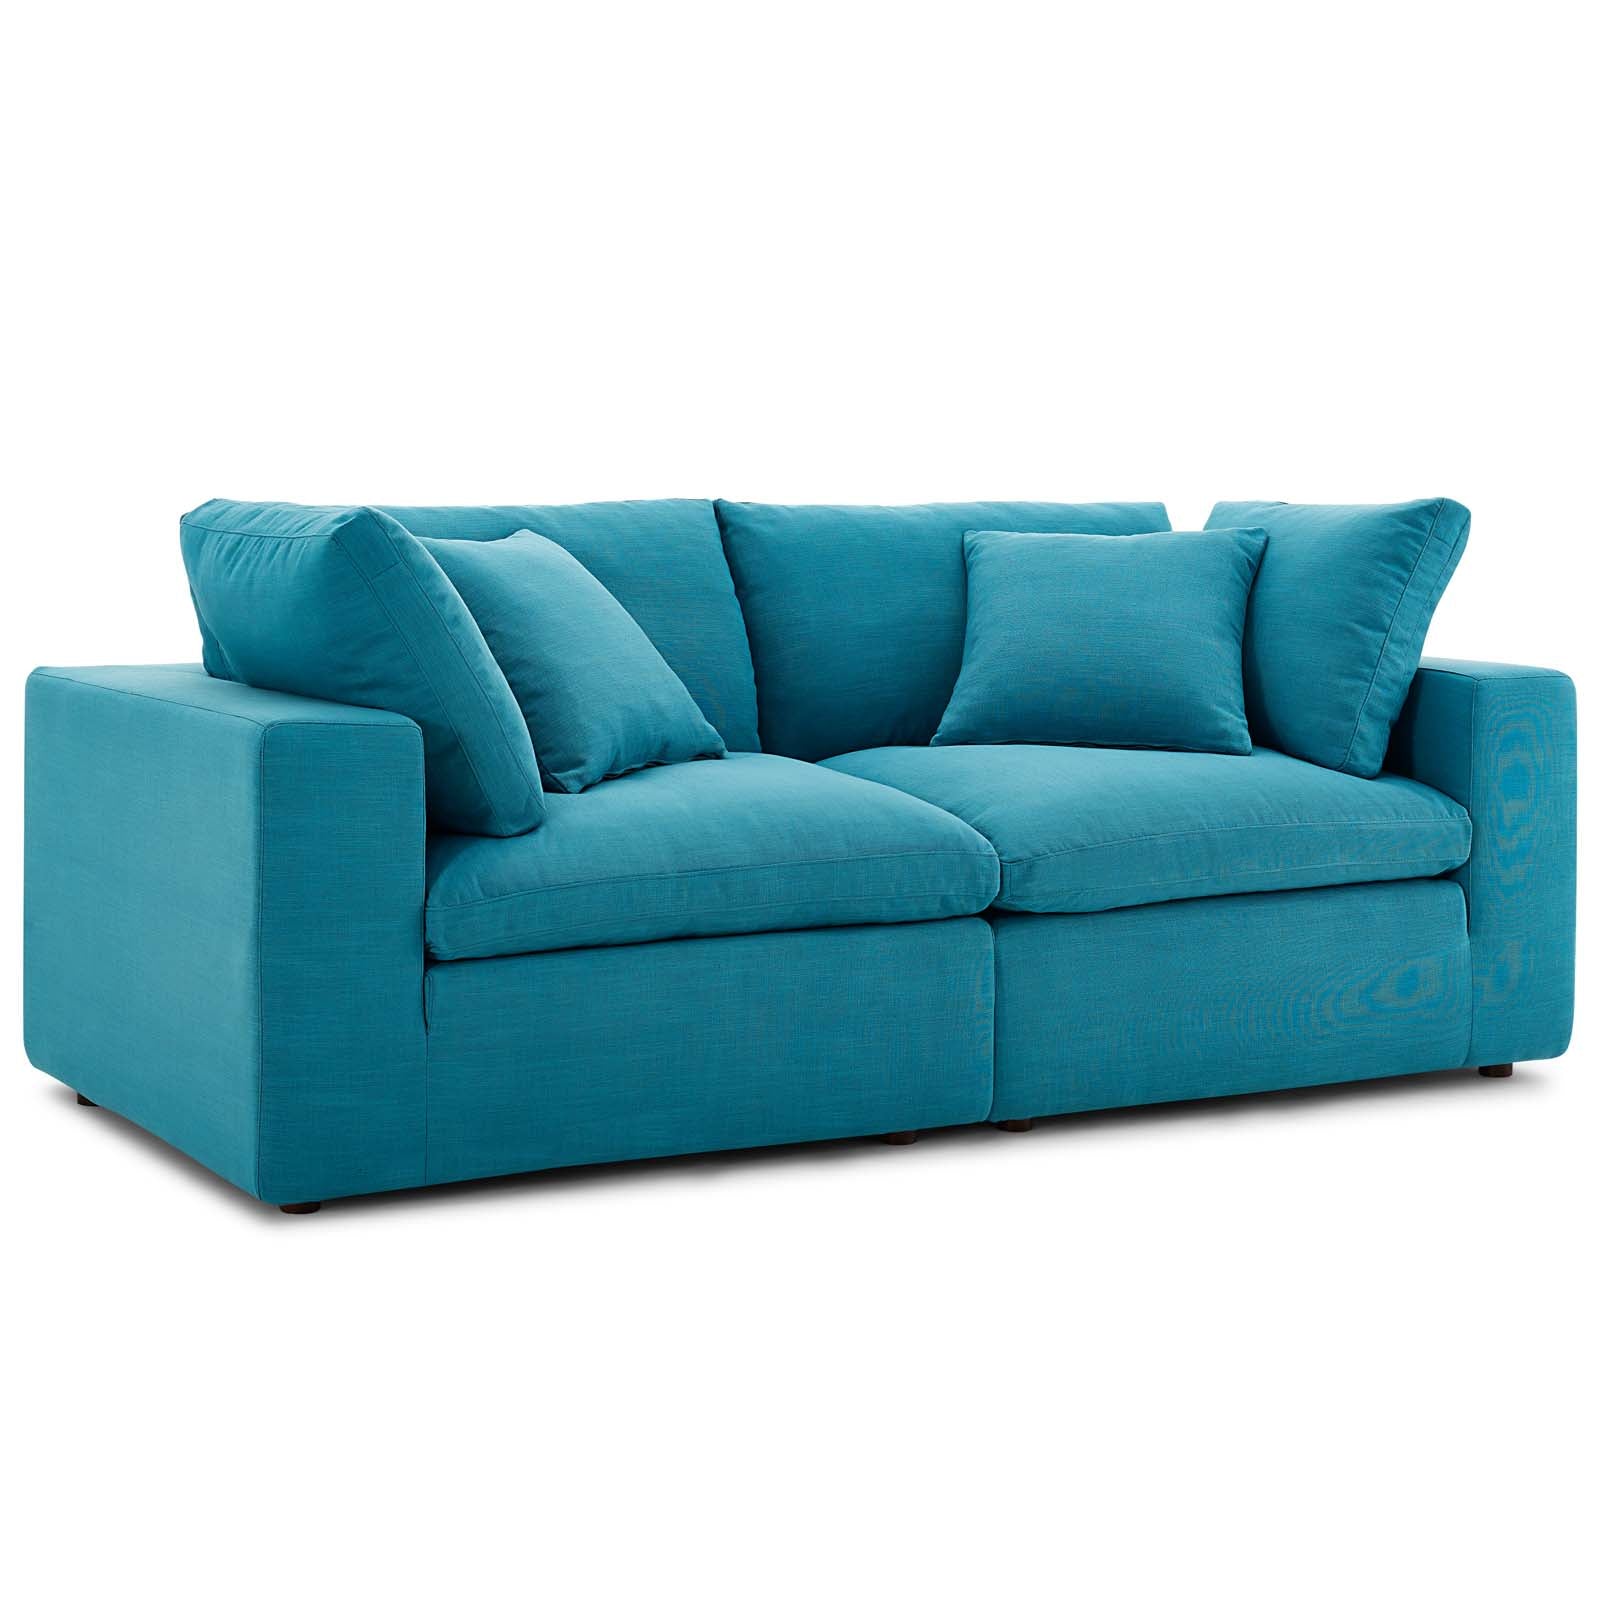 Commix Down Filled Overstuffed 2 Piece Sectional Sofa Set - East Shore Modern Home Furnishings